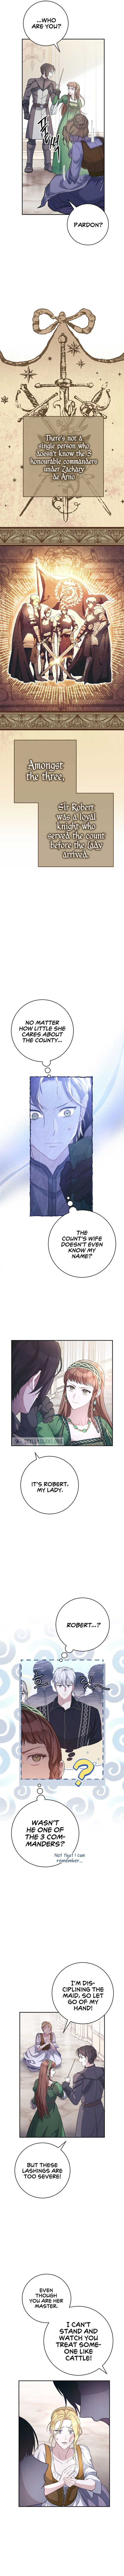 Marriage of Convenience chapter 5